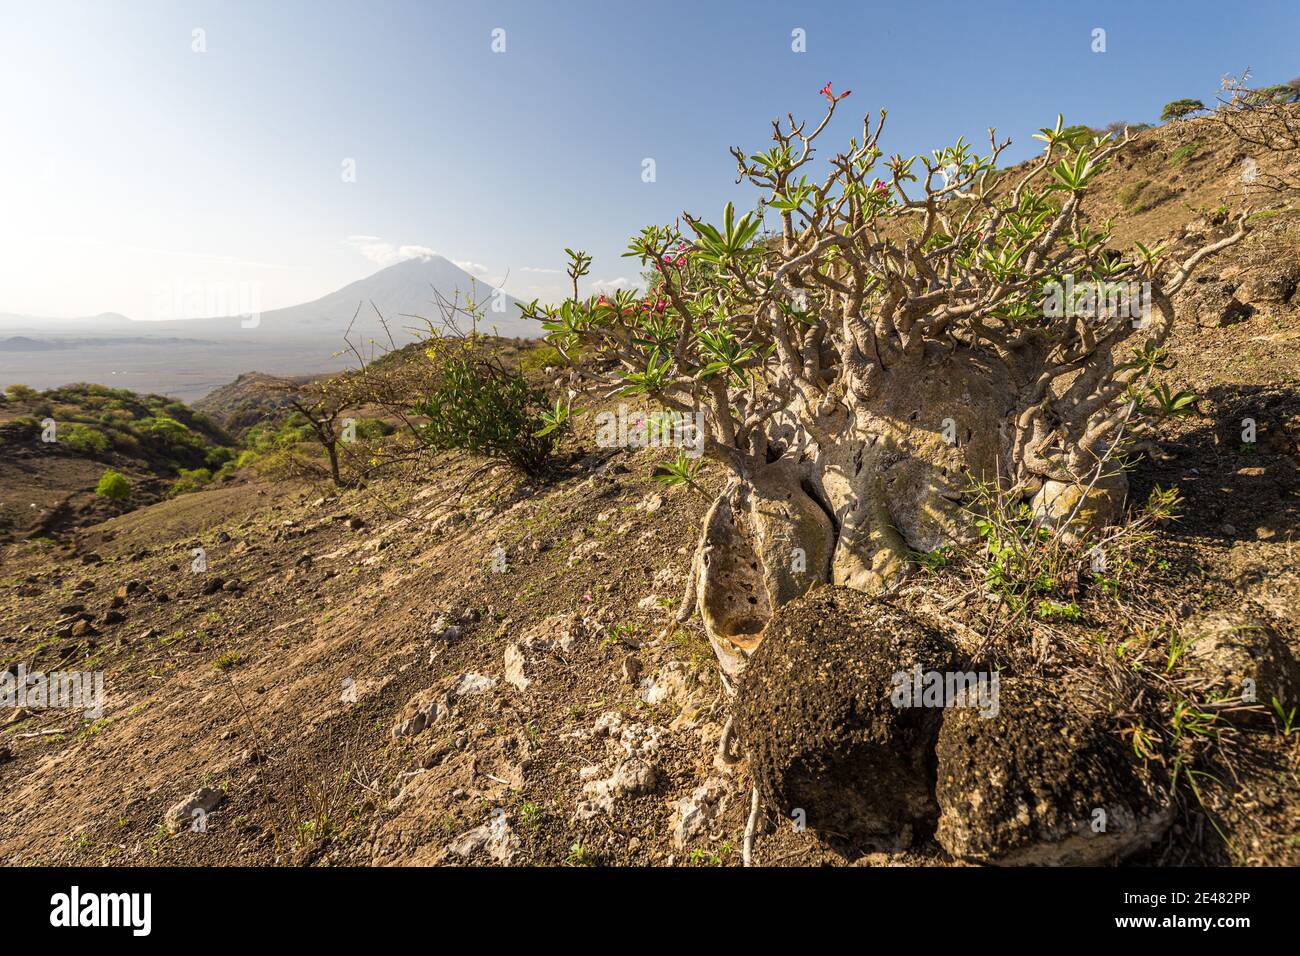 Flowering desert rose on a hill in the Lake Natron Area, Tanzania Stock Photo